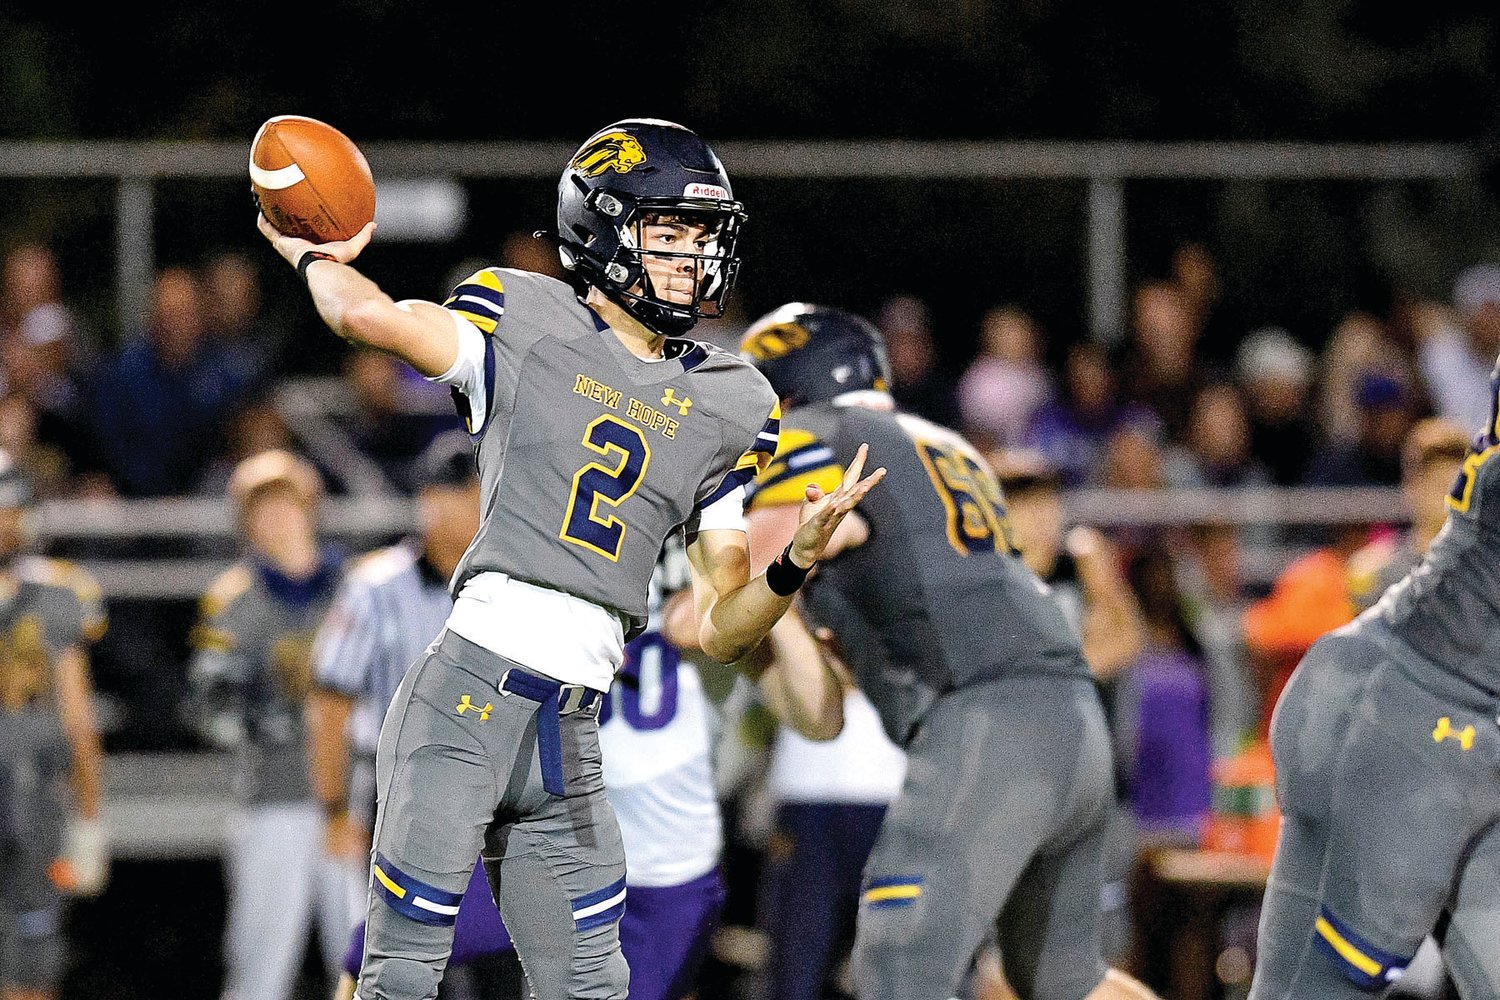 New Hope quarterback Sean Cooney looks to pass during Upper Moreland’s 41-14 win.